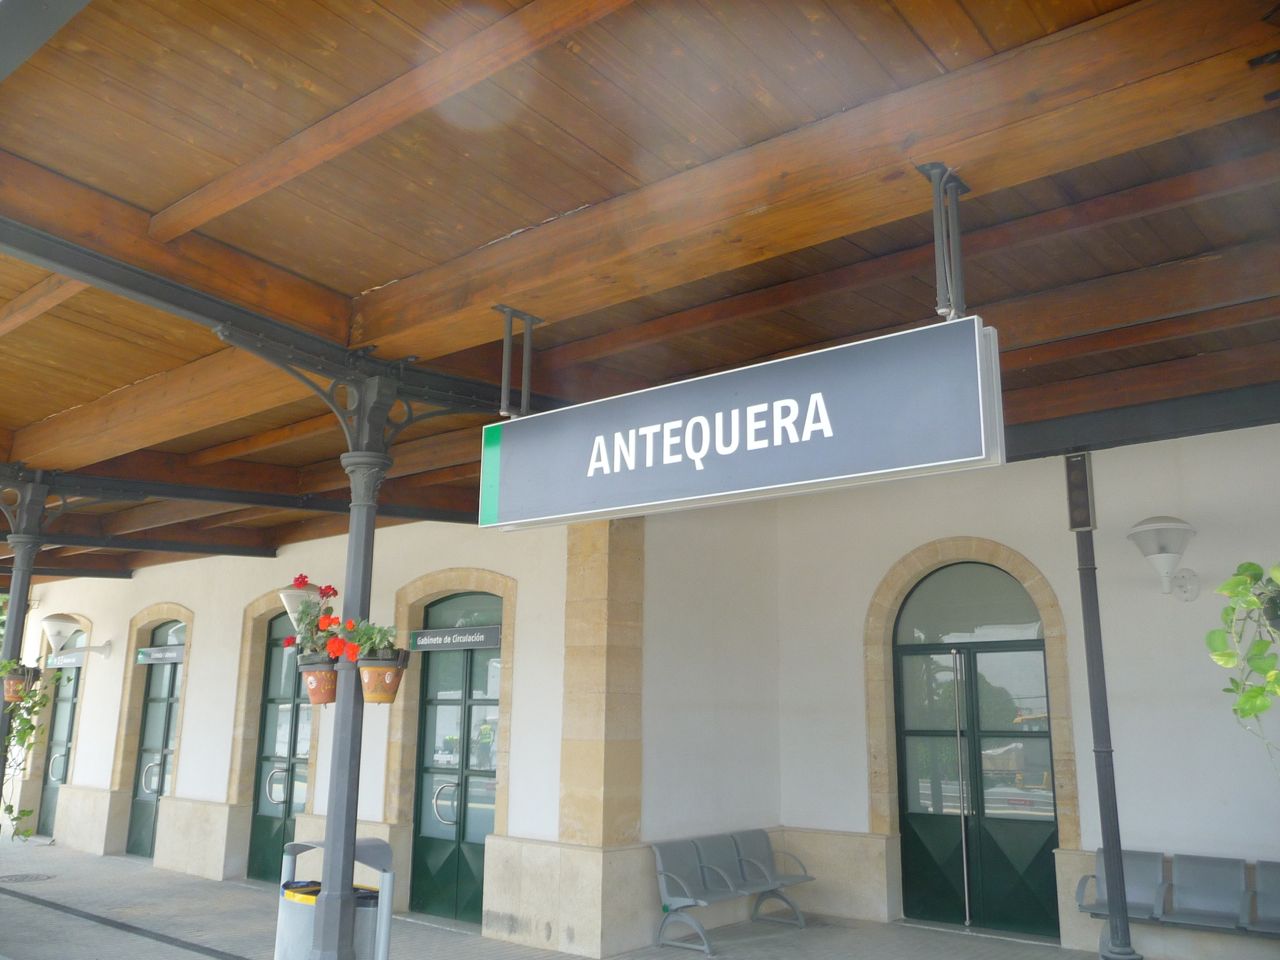 In Antequera – The Sights